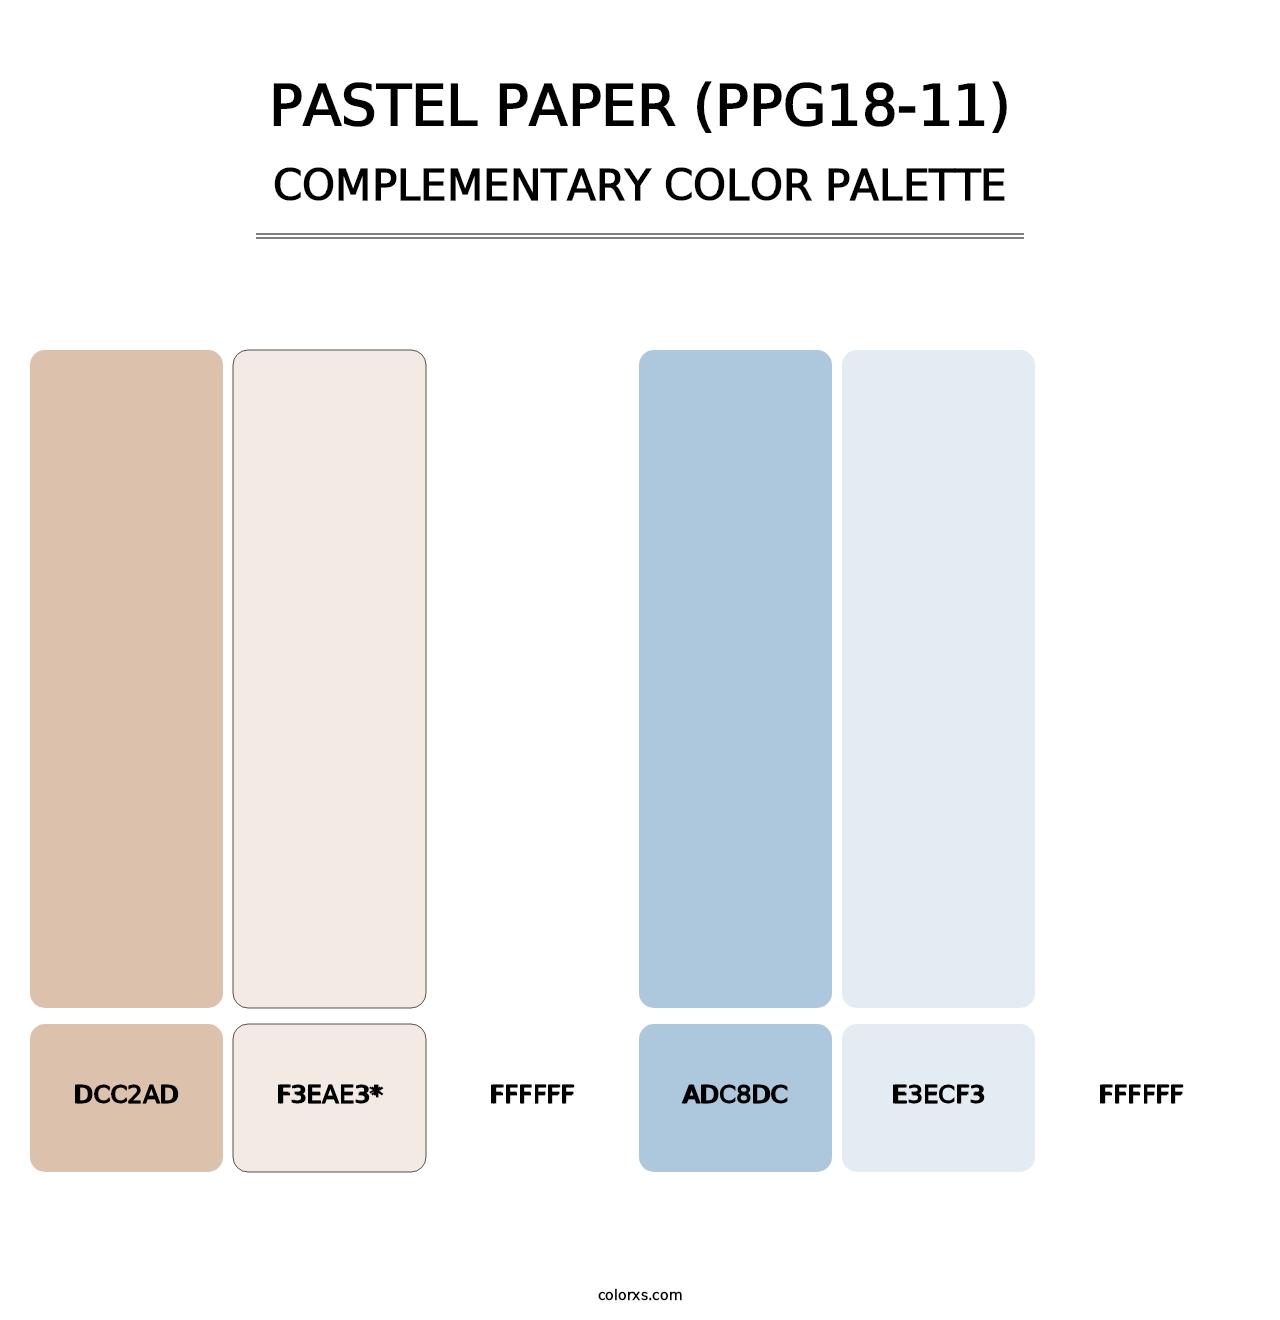 Pastel Paper (PPG18-11) - Complementary Color Palette